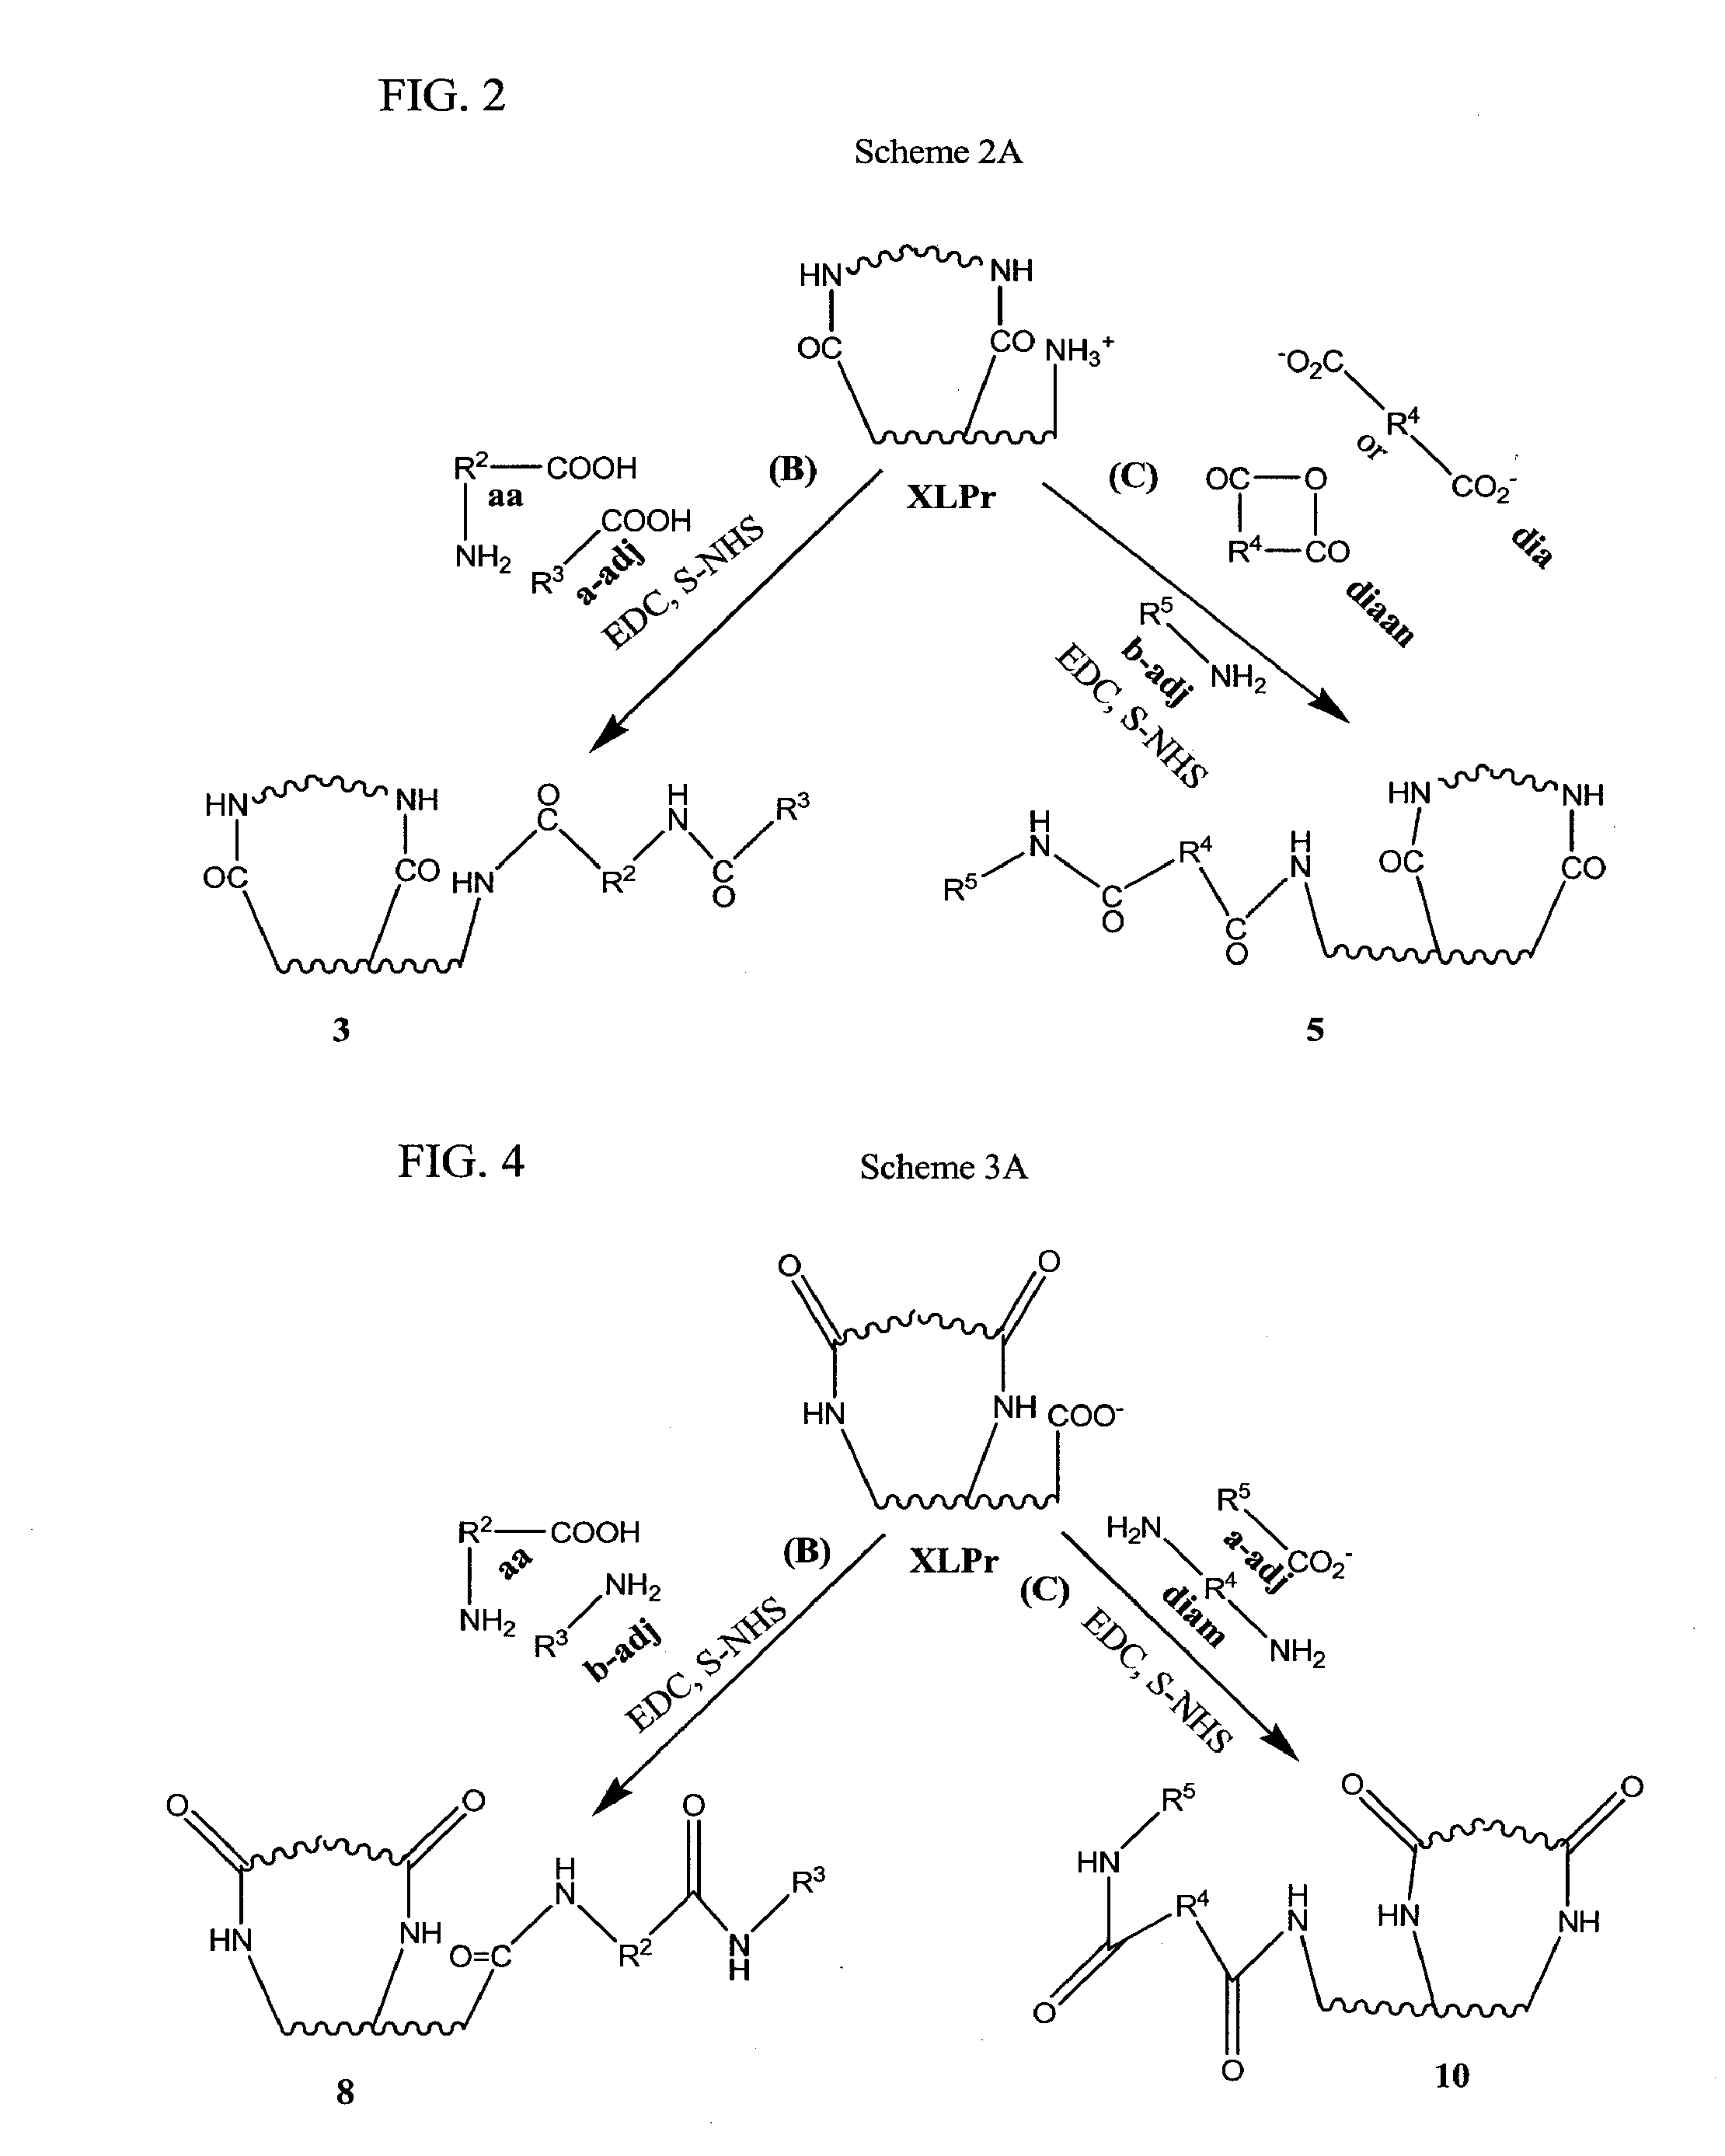 Stabilized, sterilized collagen scaffolds with active adjuncts attached